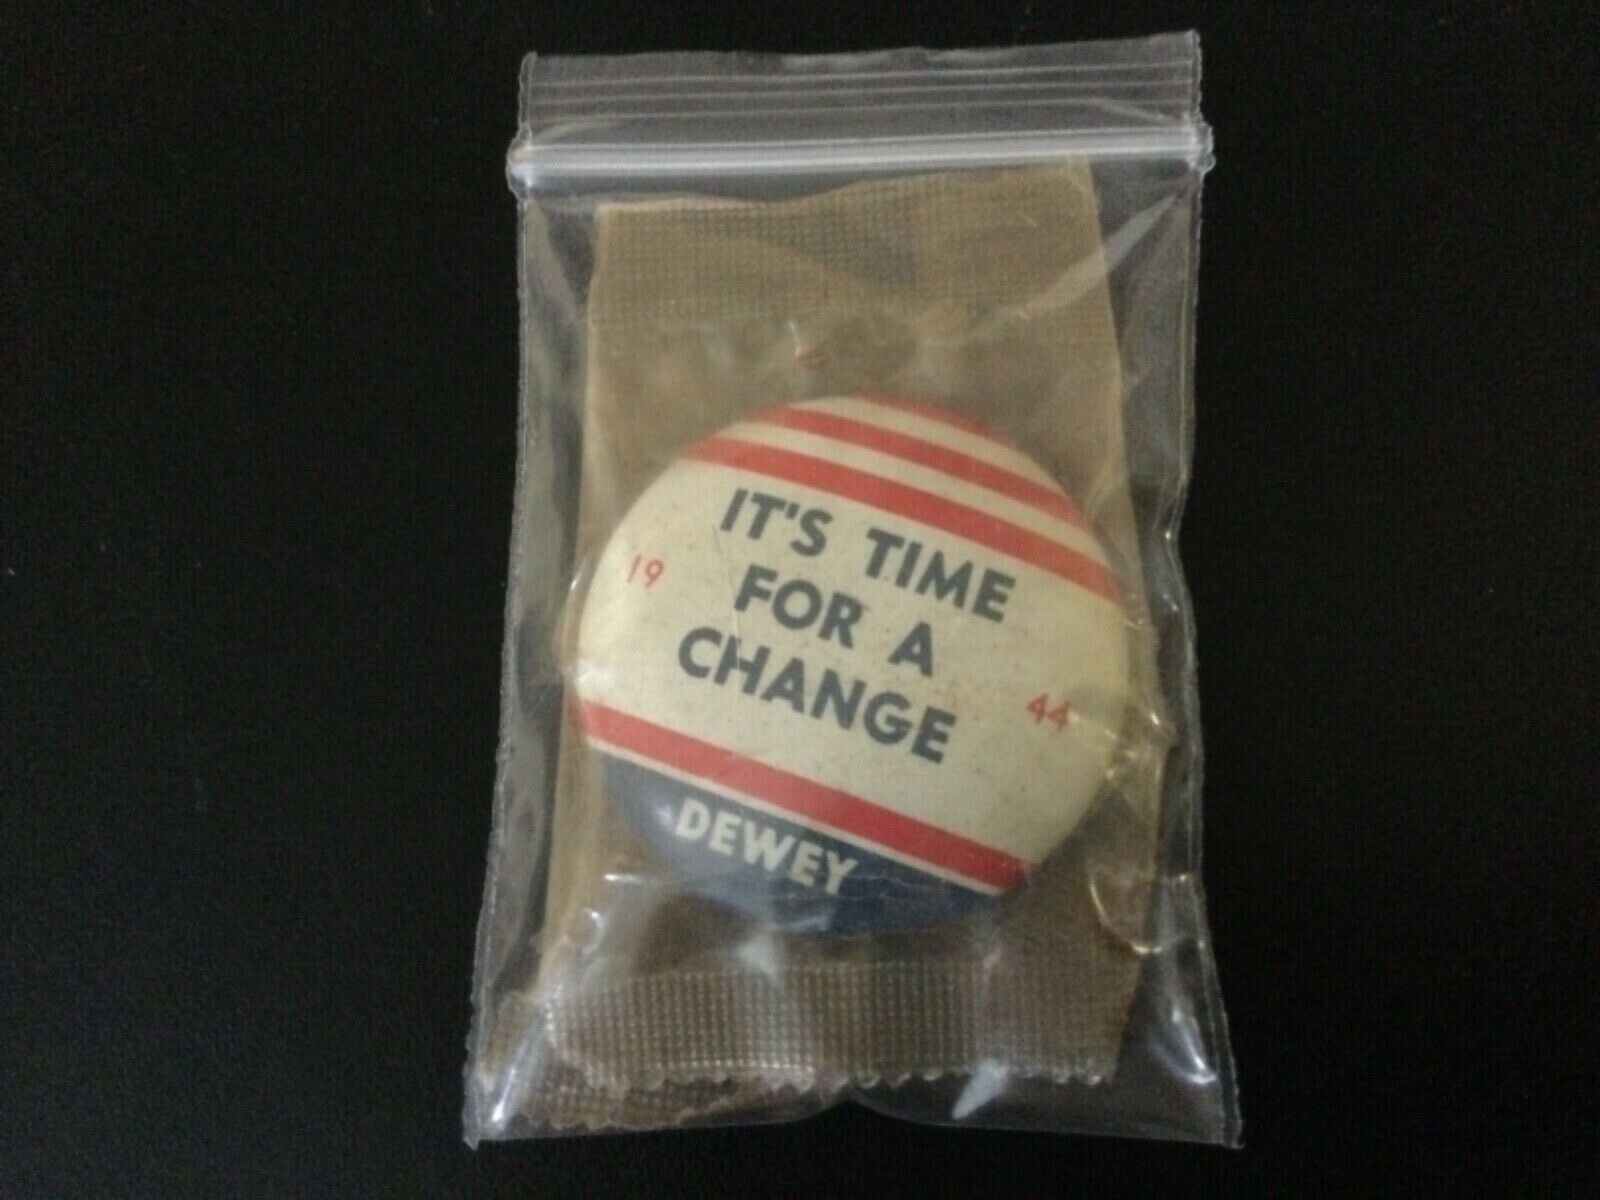 1944 Dewey Campaign Pin Pinback Button Political “it’s Time For A Change”